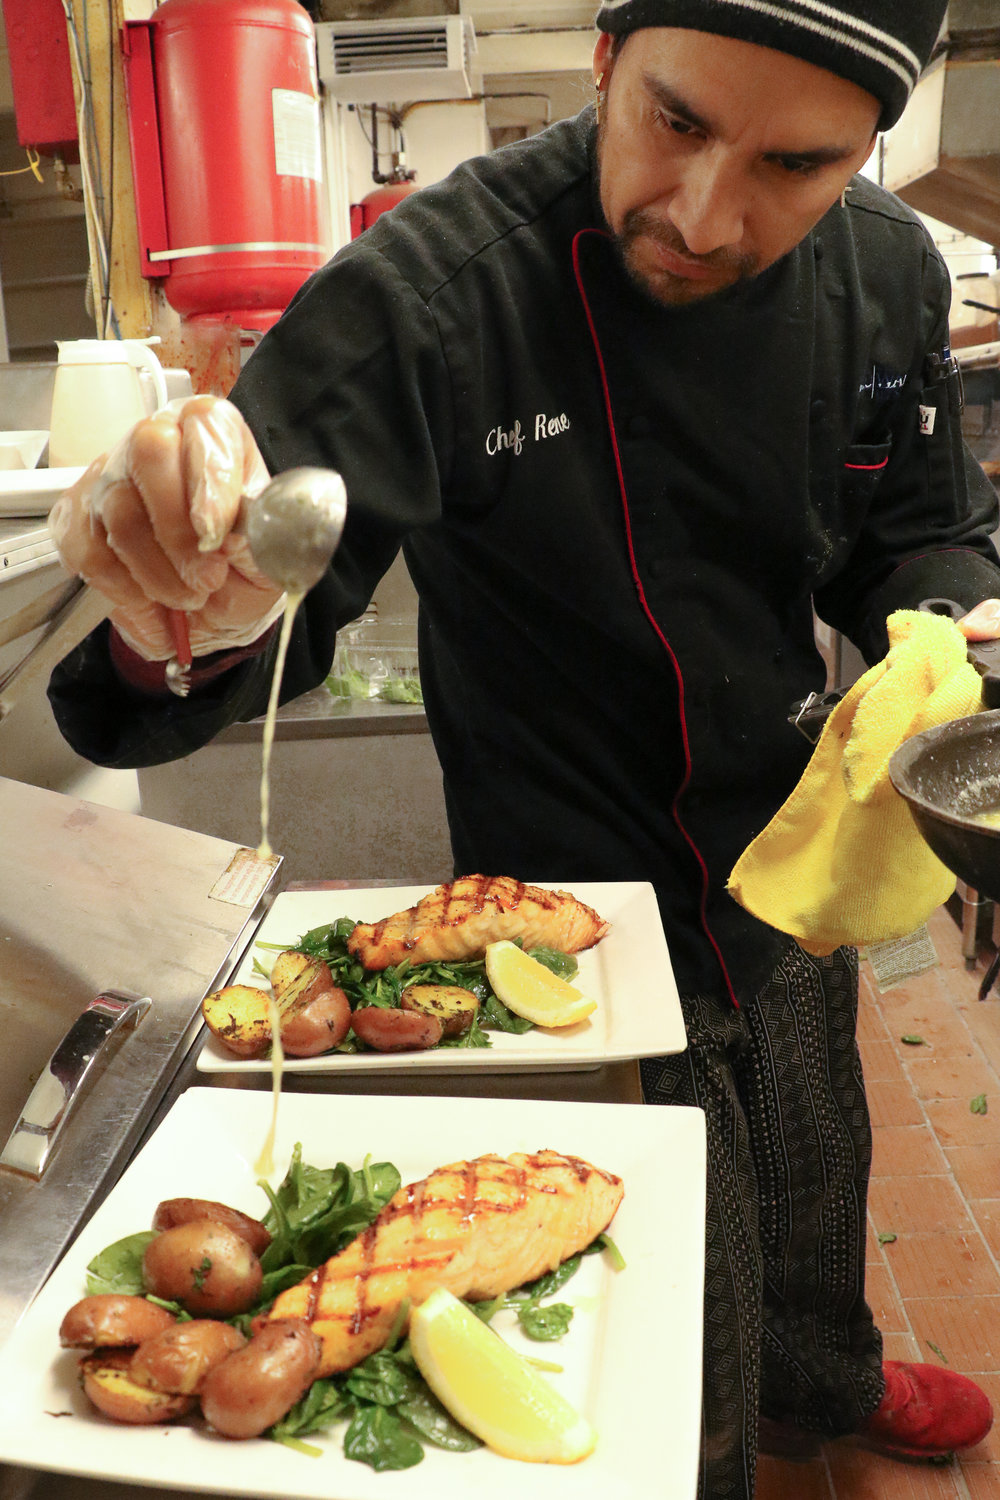 Chef Eyner "Rene" Cardona garnishes eight ounce king salmon filets with butter sauce before sending them out for sampling on Monday morning.